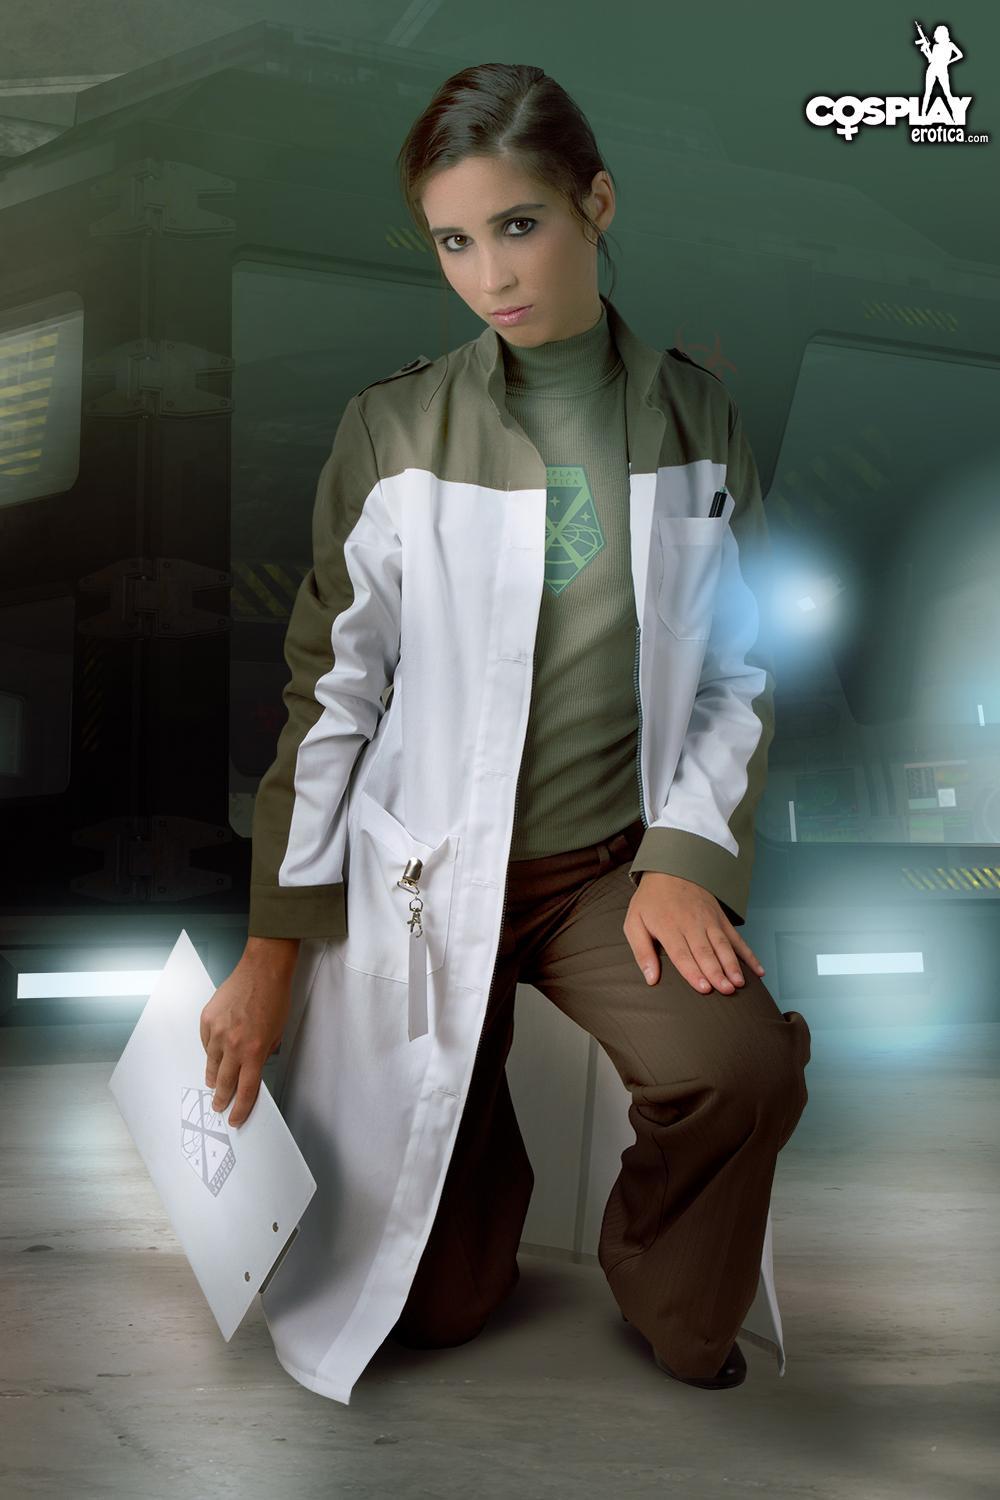 Beautiful cosplayer Stacy dresses up as Dr. Vahlen from X-Com #60007911